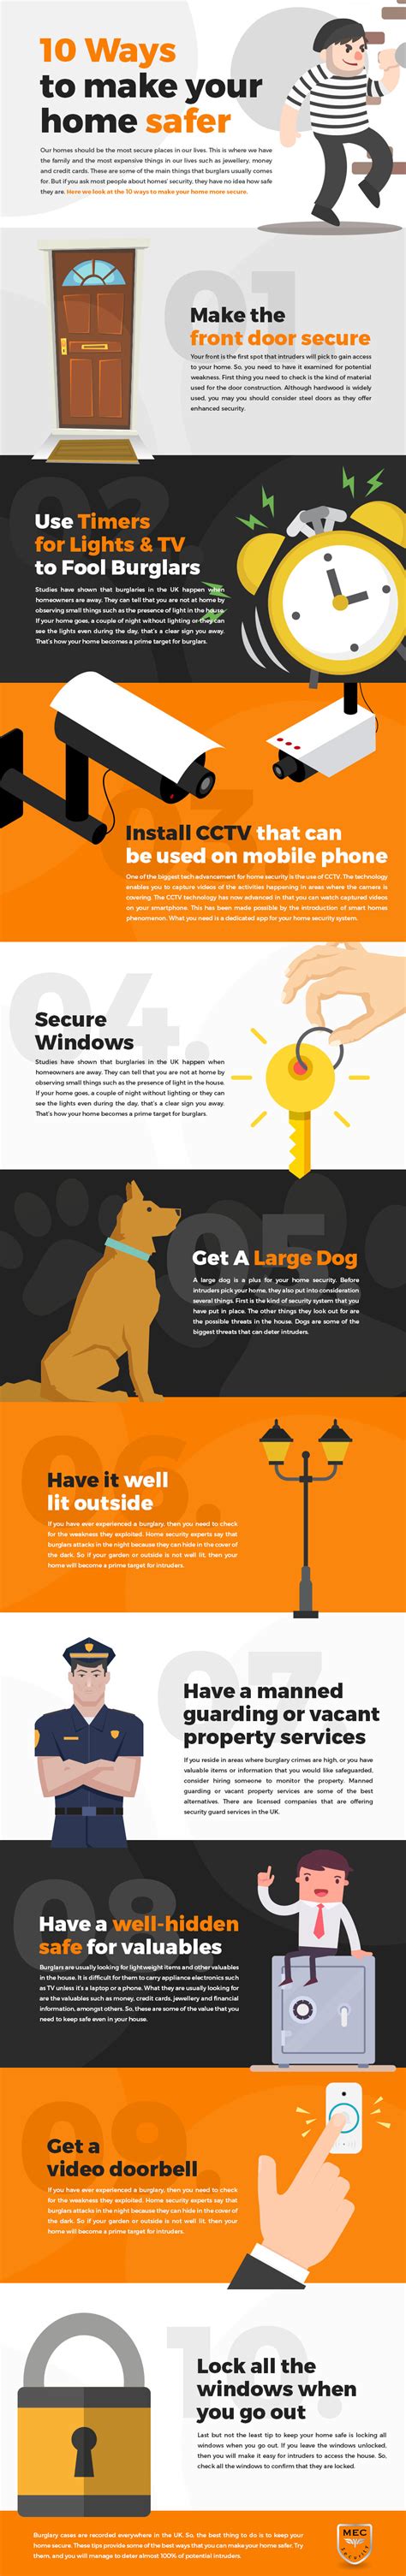 Ways To Make Your Home Safer Infographic